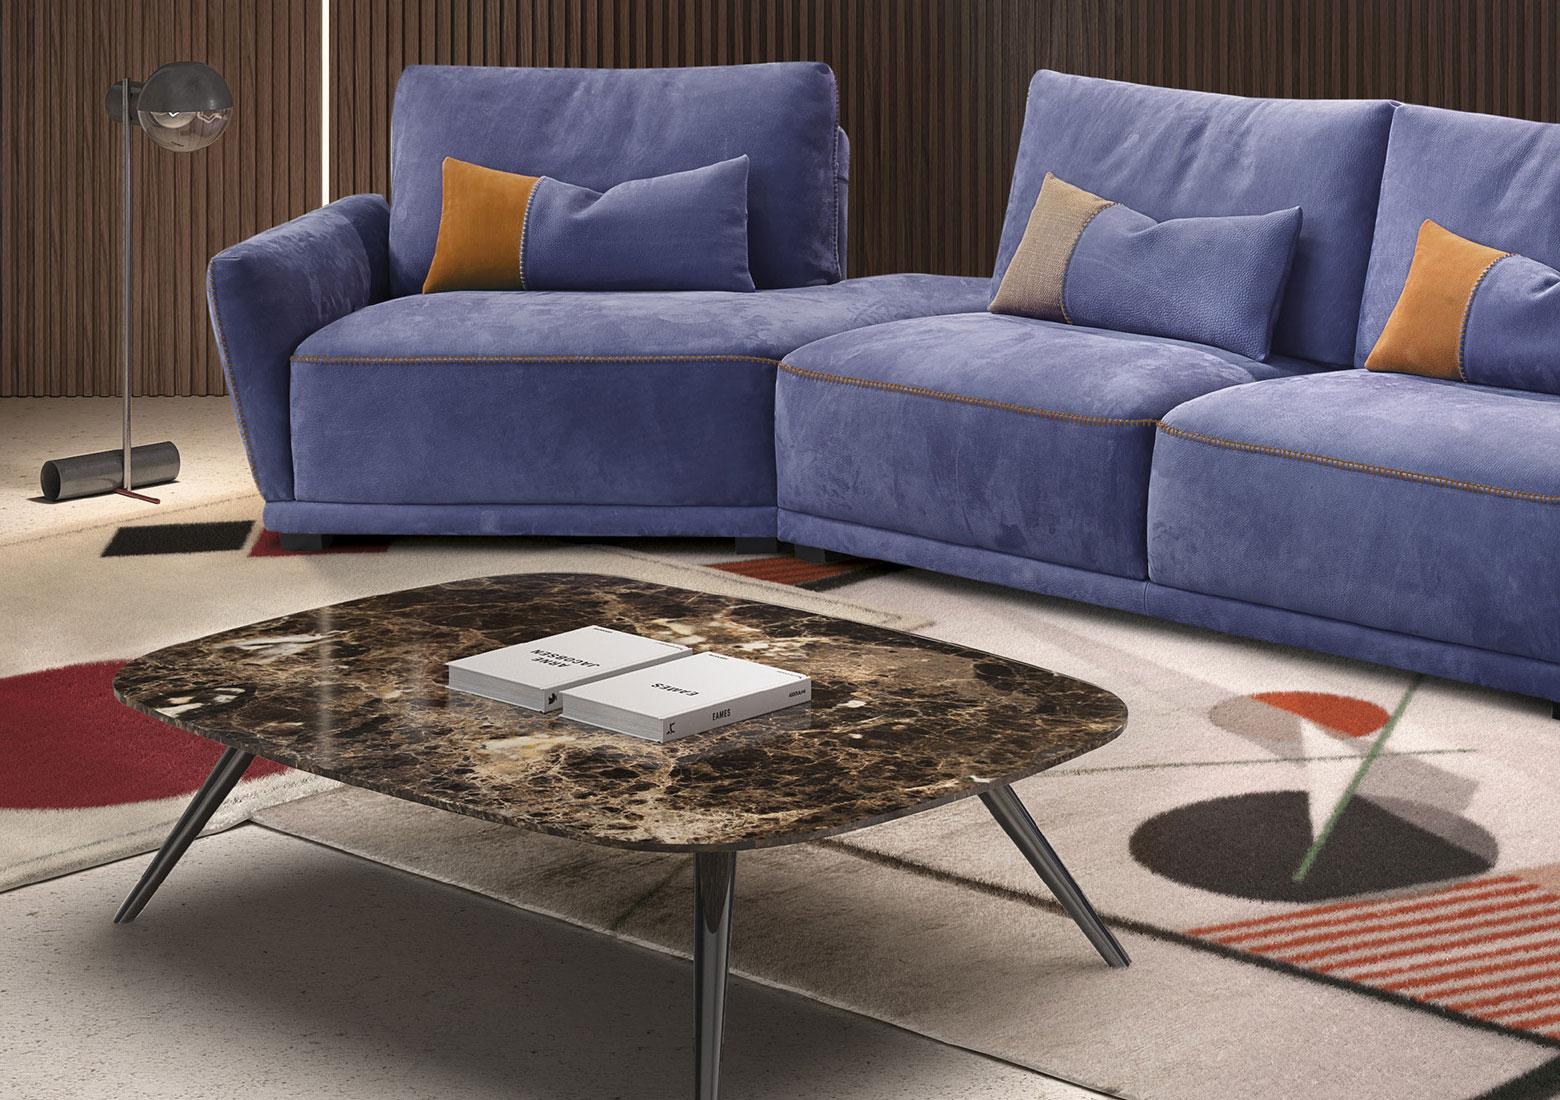 The clean and contemporary lines of Marbella, our luxury marble coffee table, offer standout style. Shop online for marble coffee tables made in Italy.